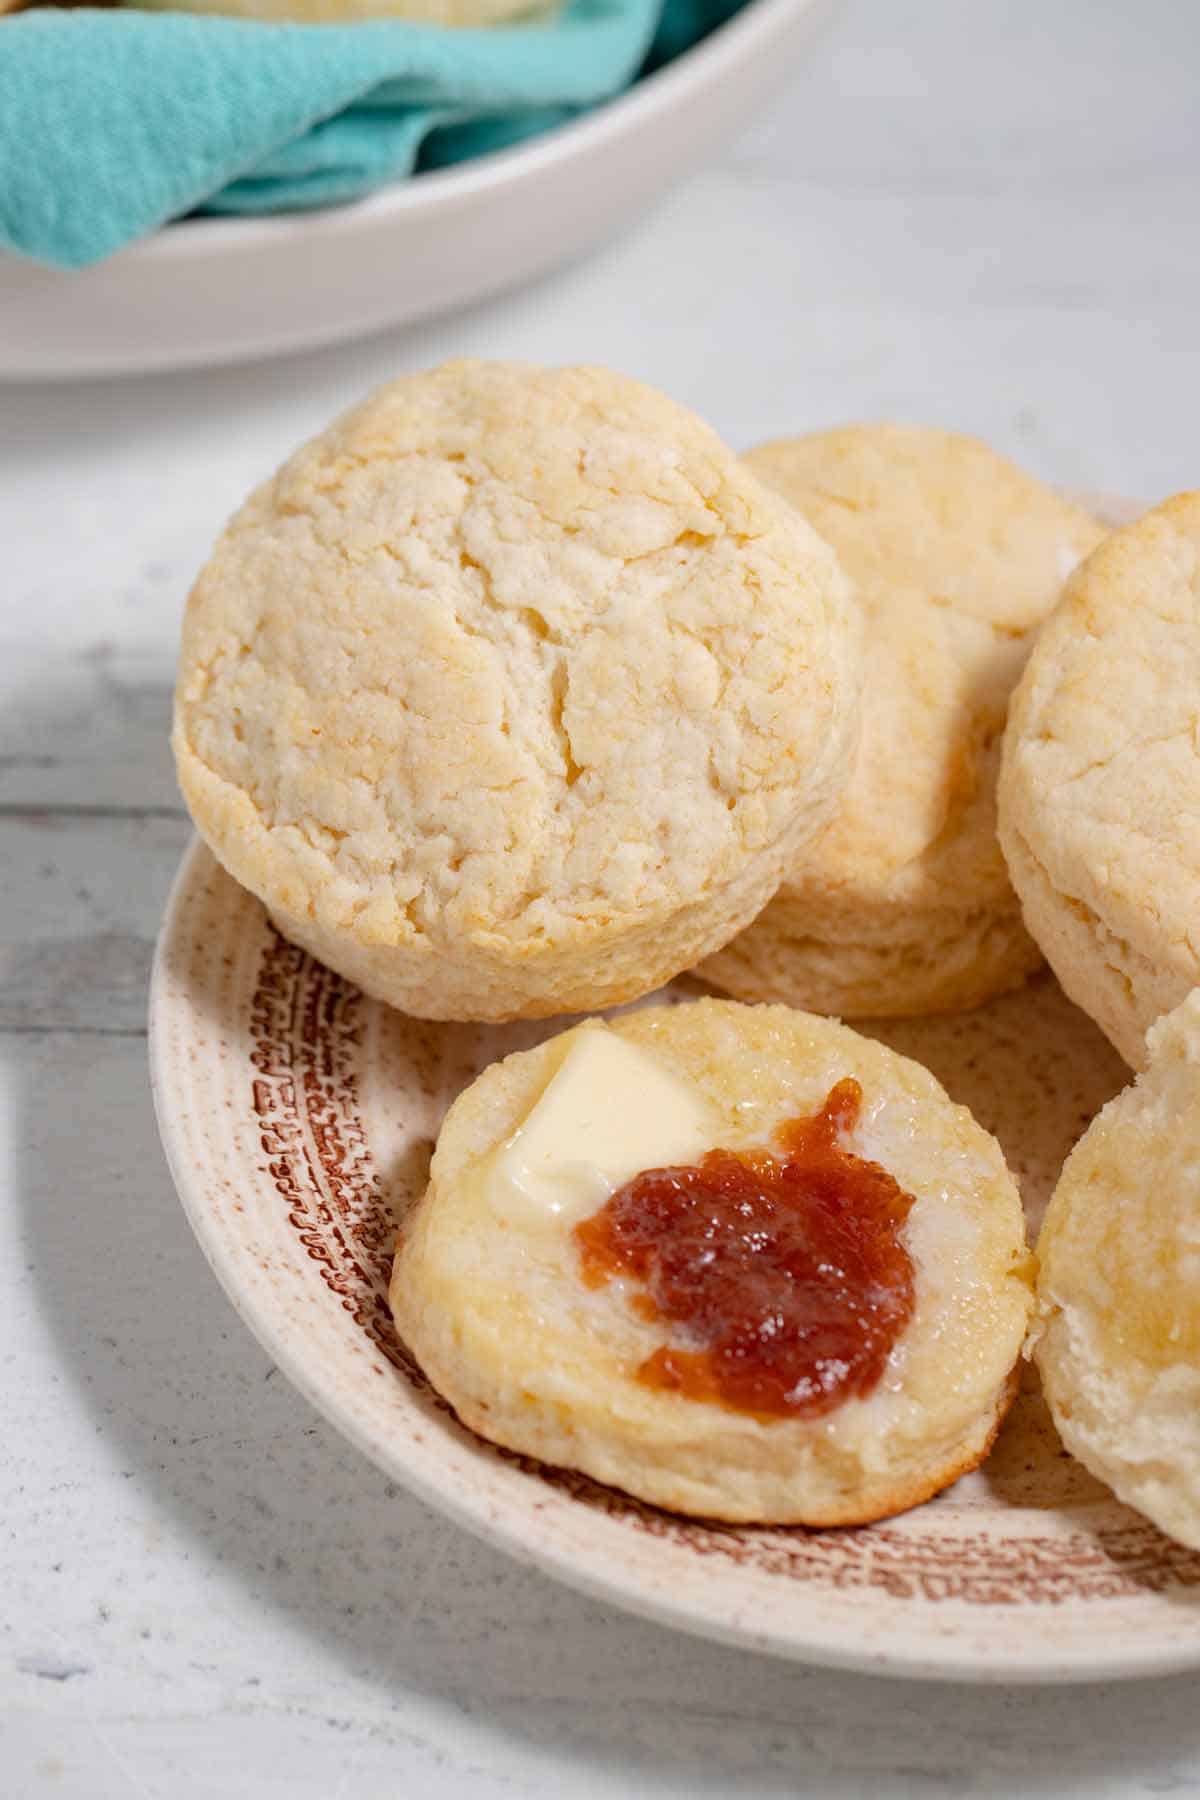 Buttermilk biscuits on a plate.